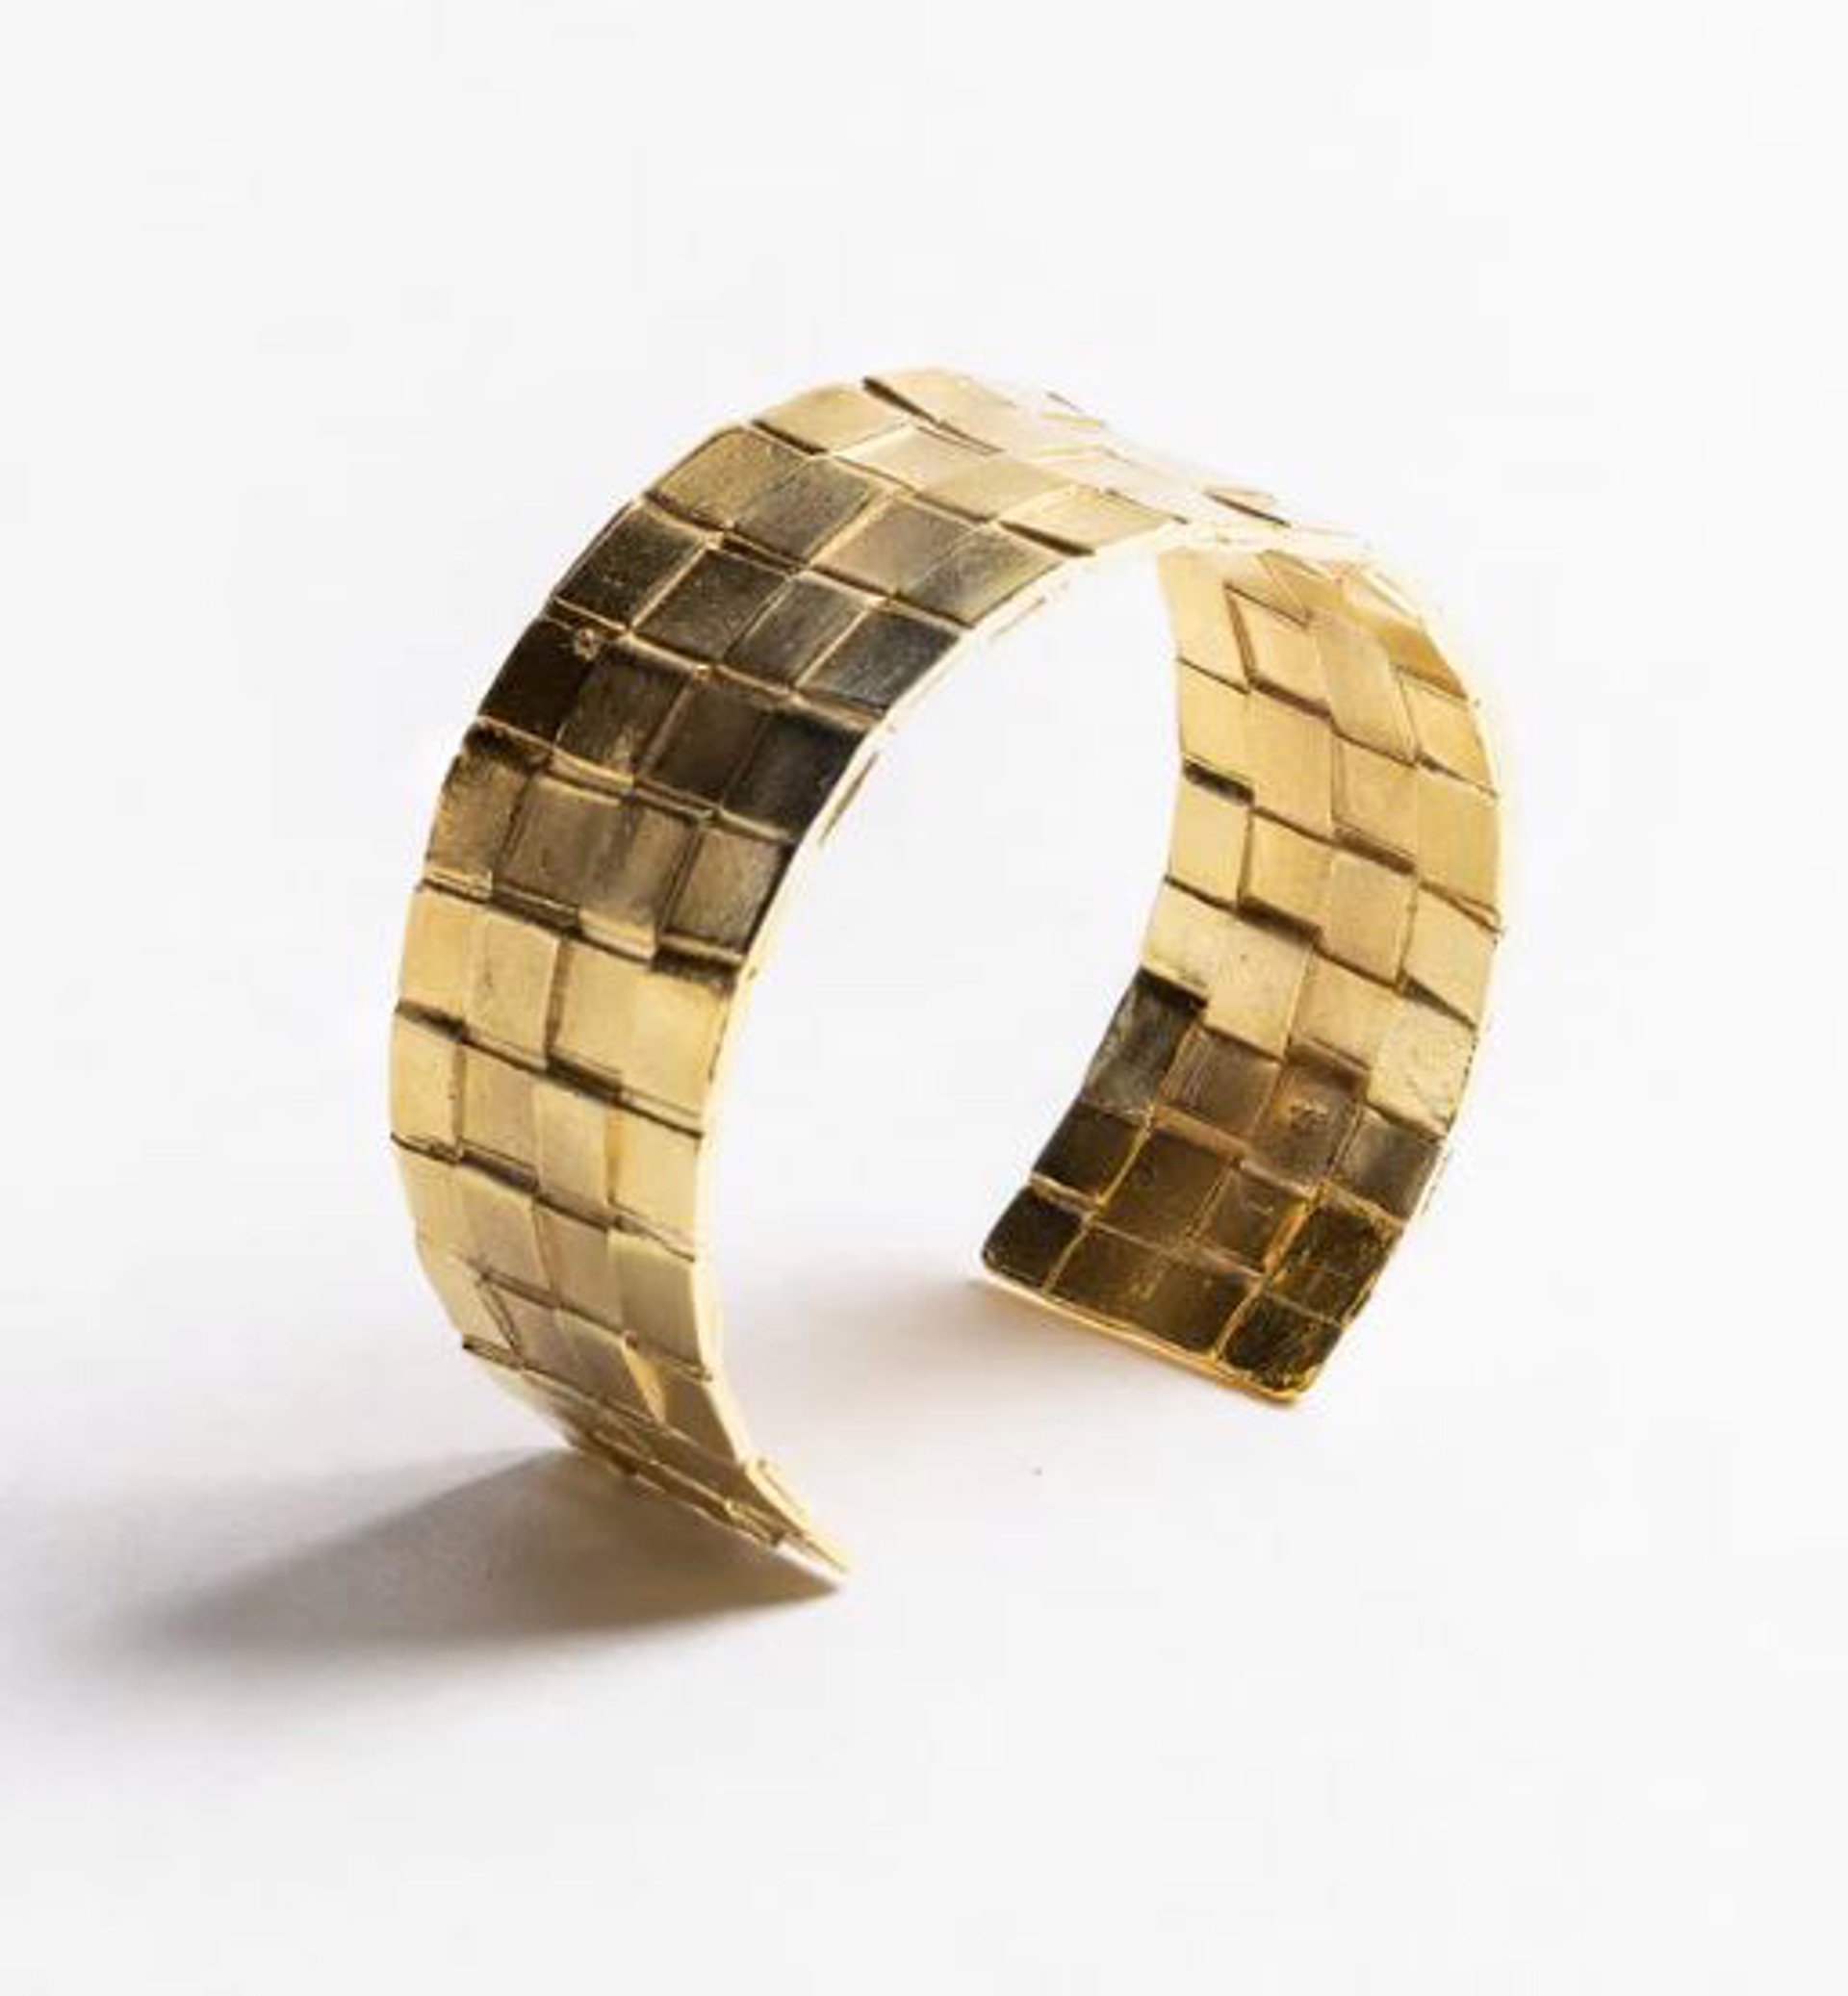 Woven Cuff - Gold Plated by Sydnie Wainland